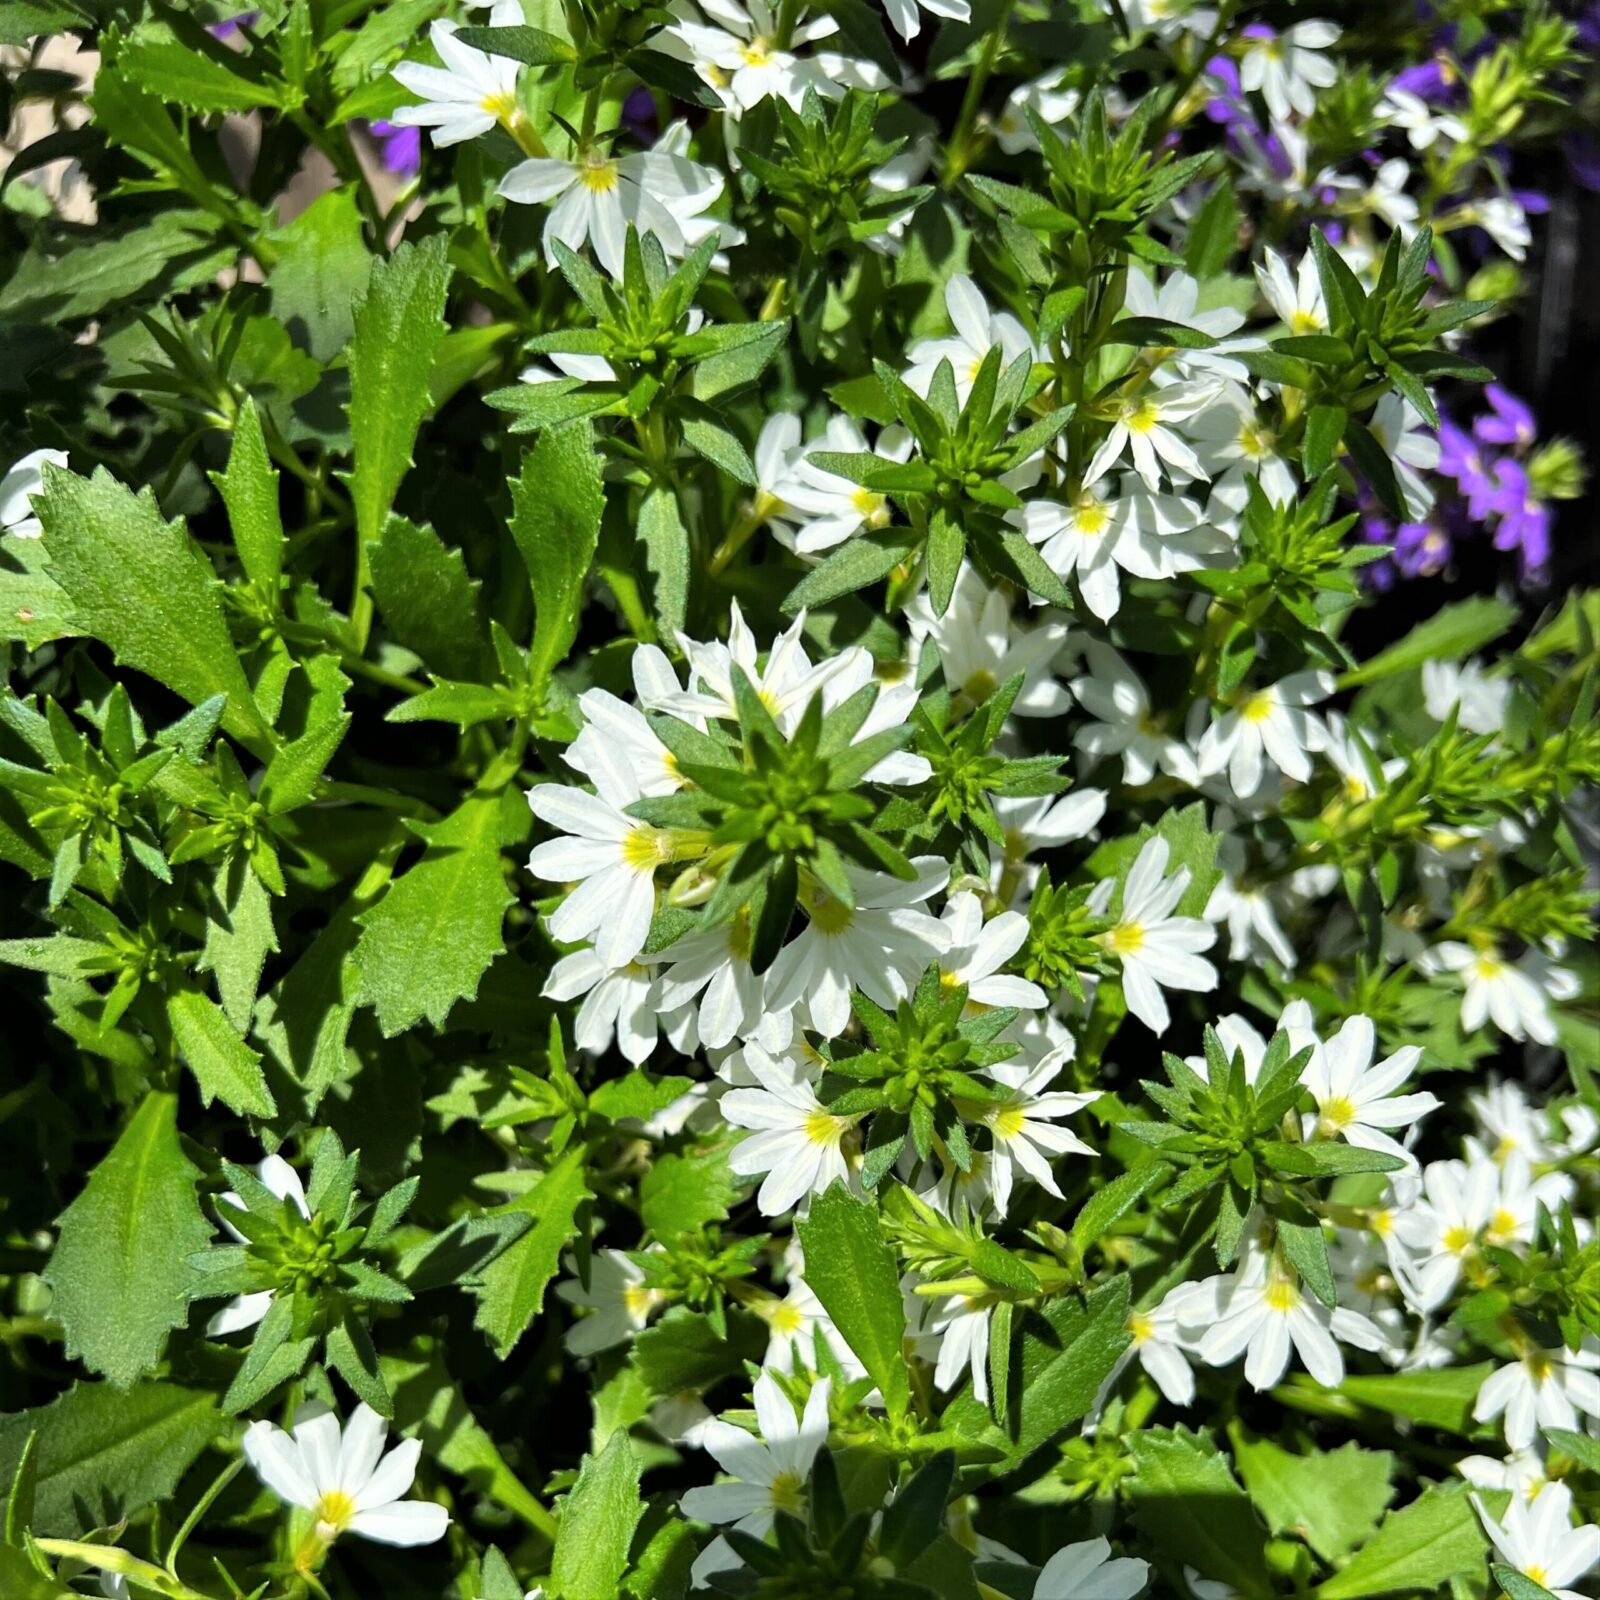 Greenstreet Growers Wholesale Landscape Supply Finished Production Plants Annual Scaevola Fan Flower White